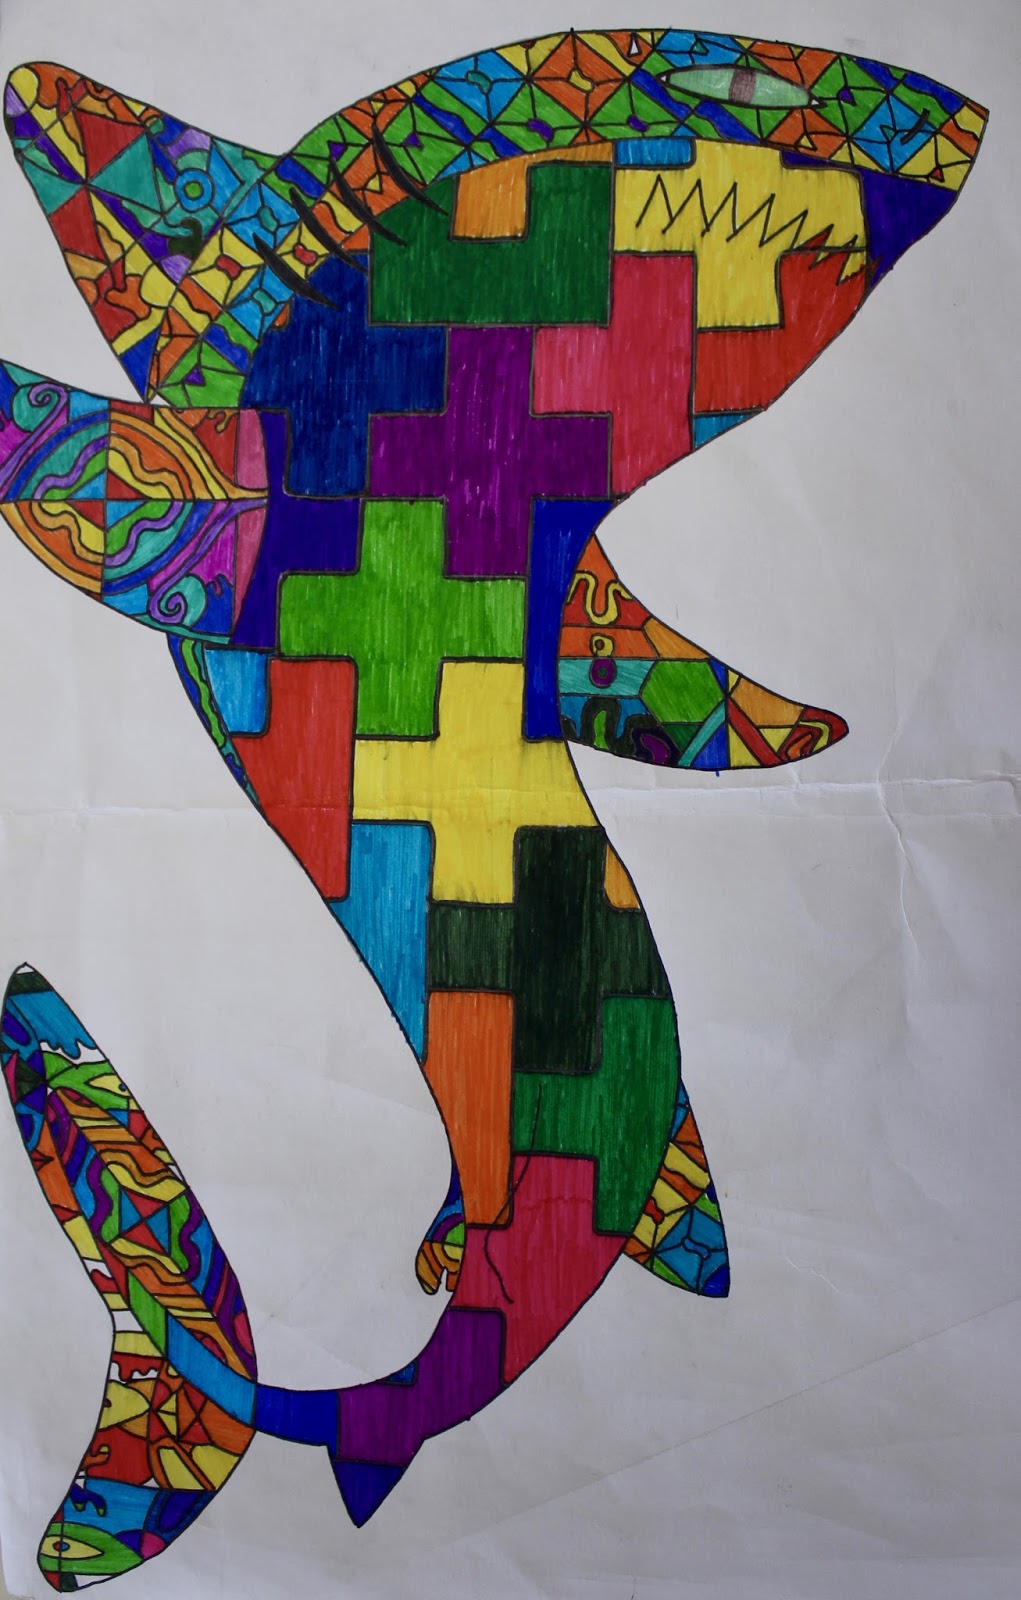 Room 261-Ms. Parrish's Art Classes: Art 1 students have been studying the  art of Scott Wright, a local San Diego artist. Using complex patterns of  organic and geometric shapes, students have created